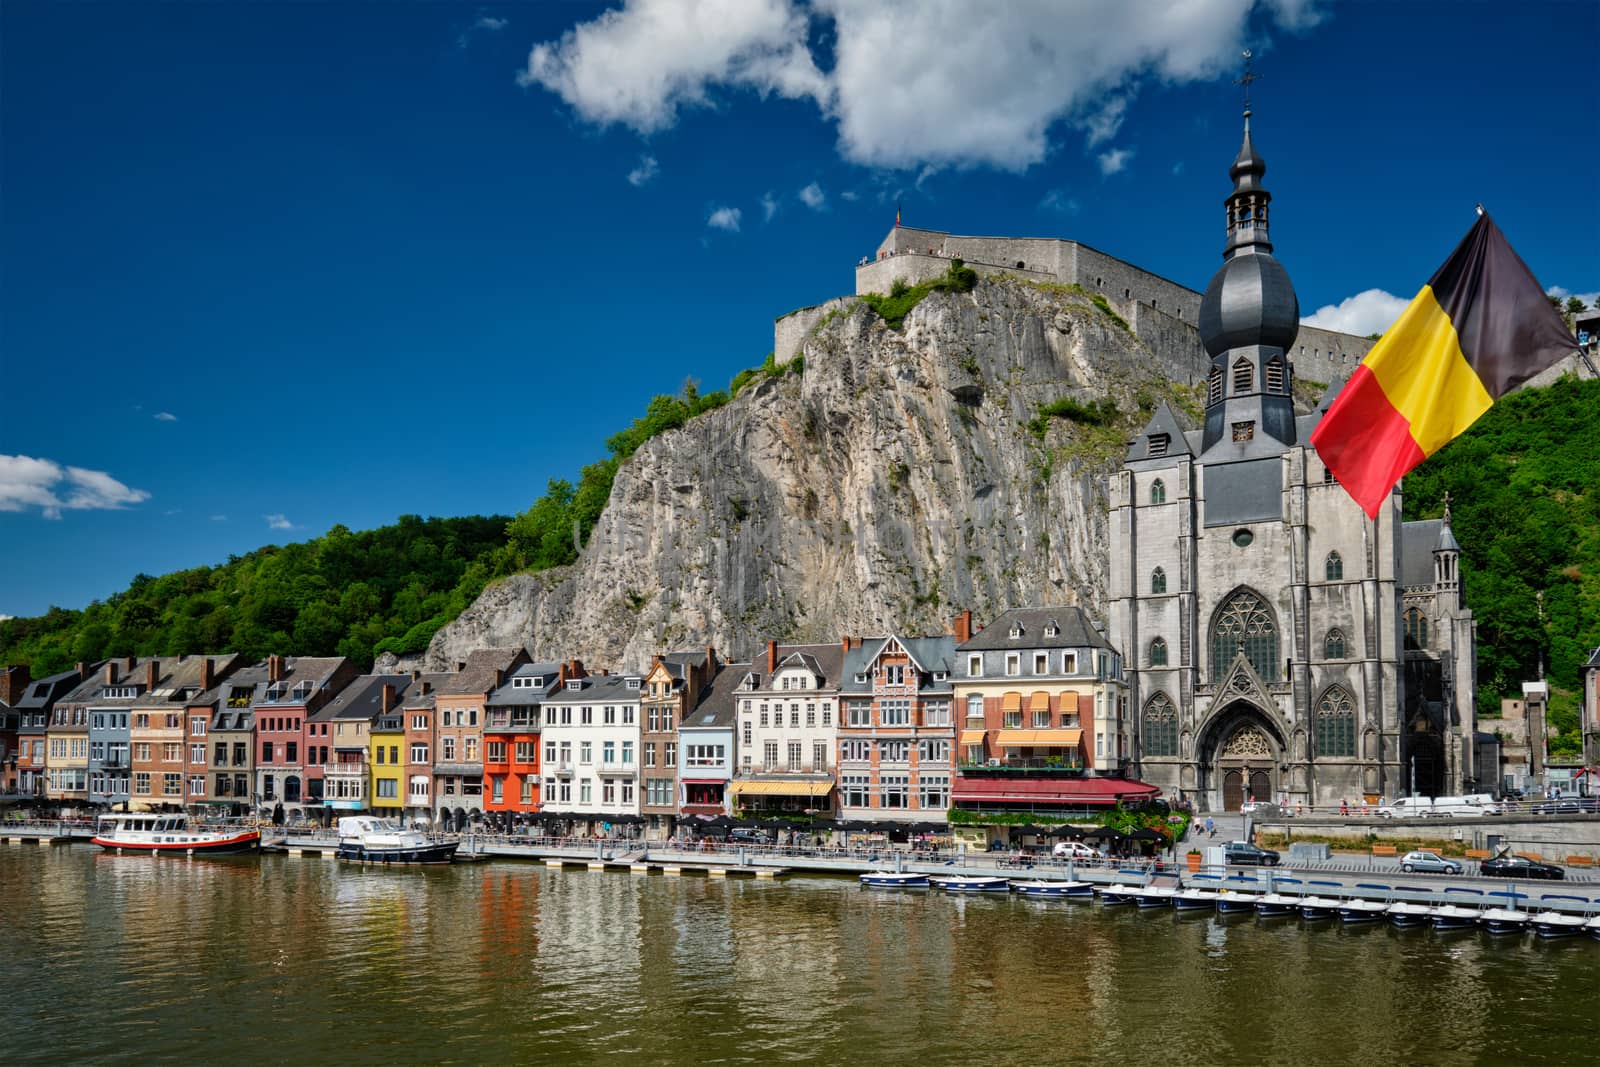 View of picturesque Dinant town, Dinant Citadel and Collegiate Church of Notre Dame de Dinant over the Meuse river. Belgian province of Namur, Blegium